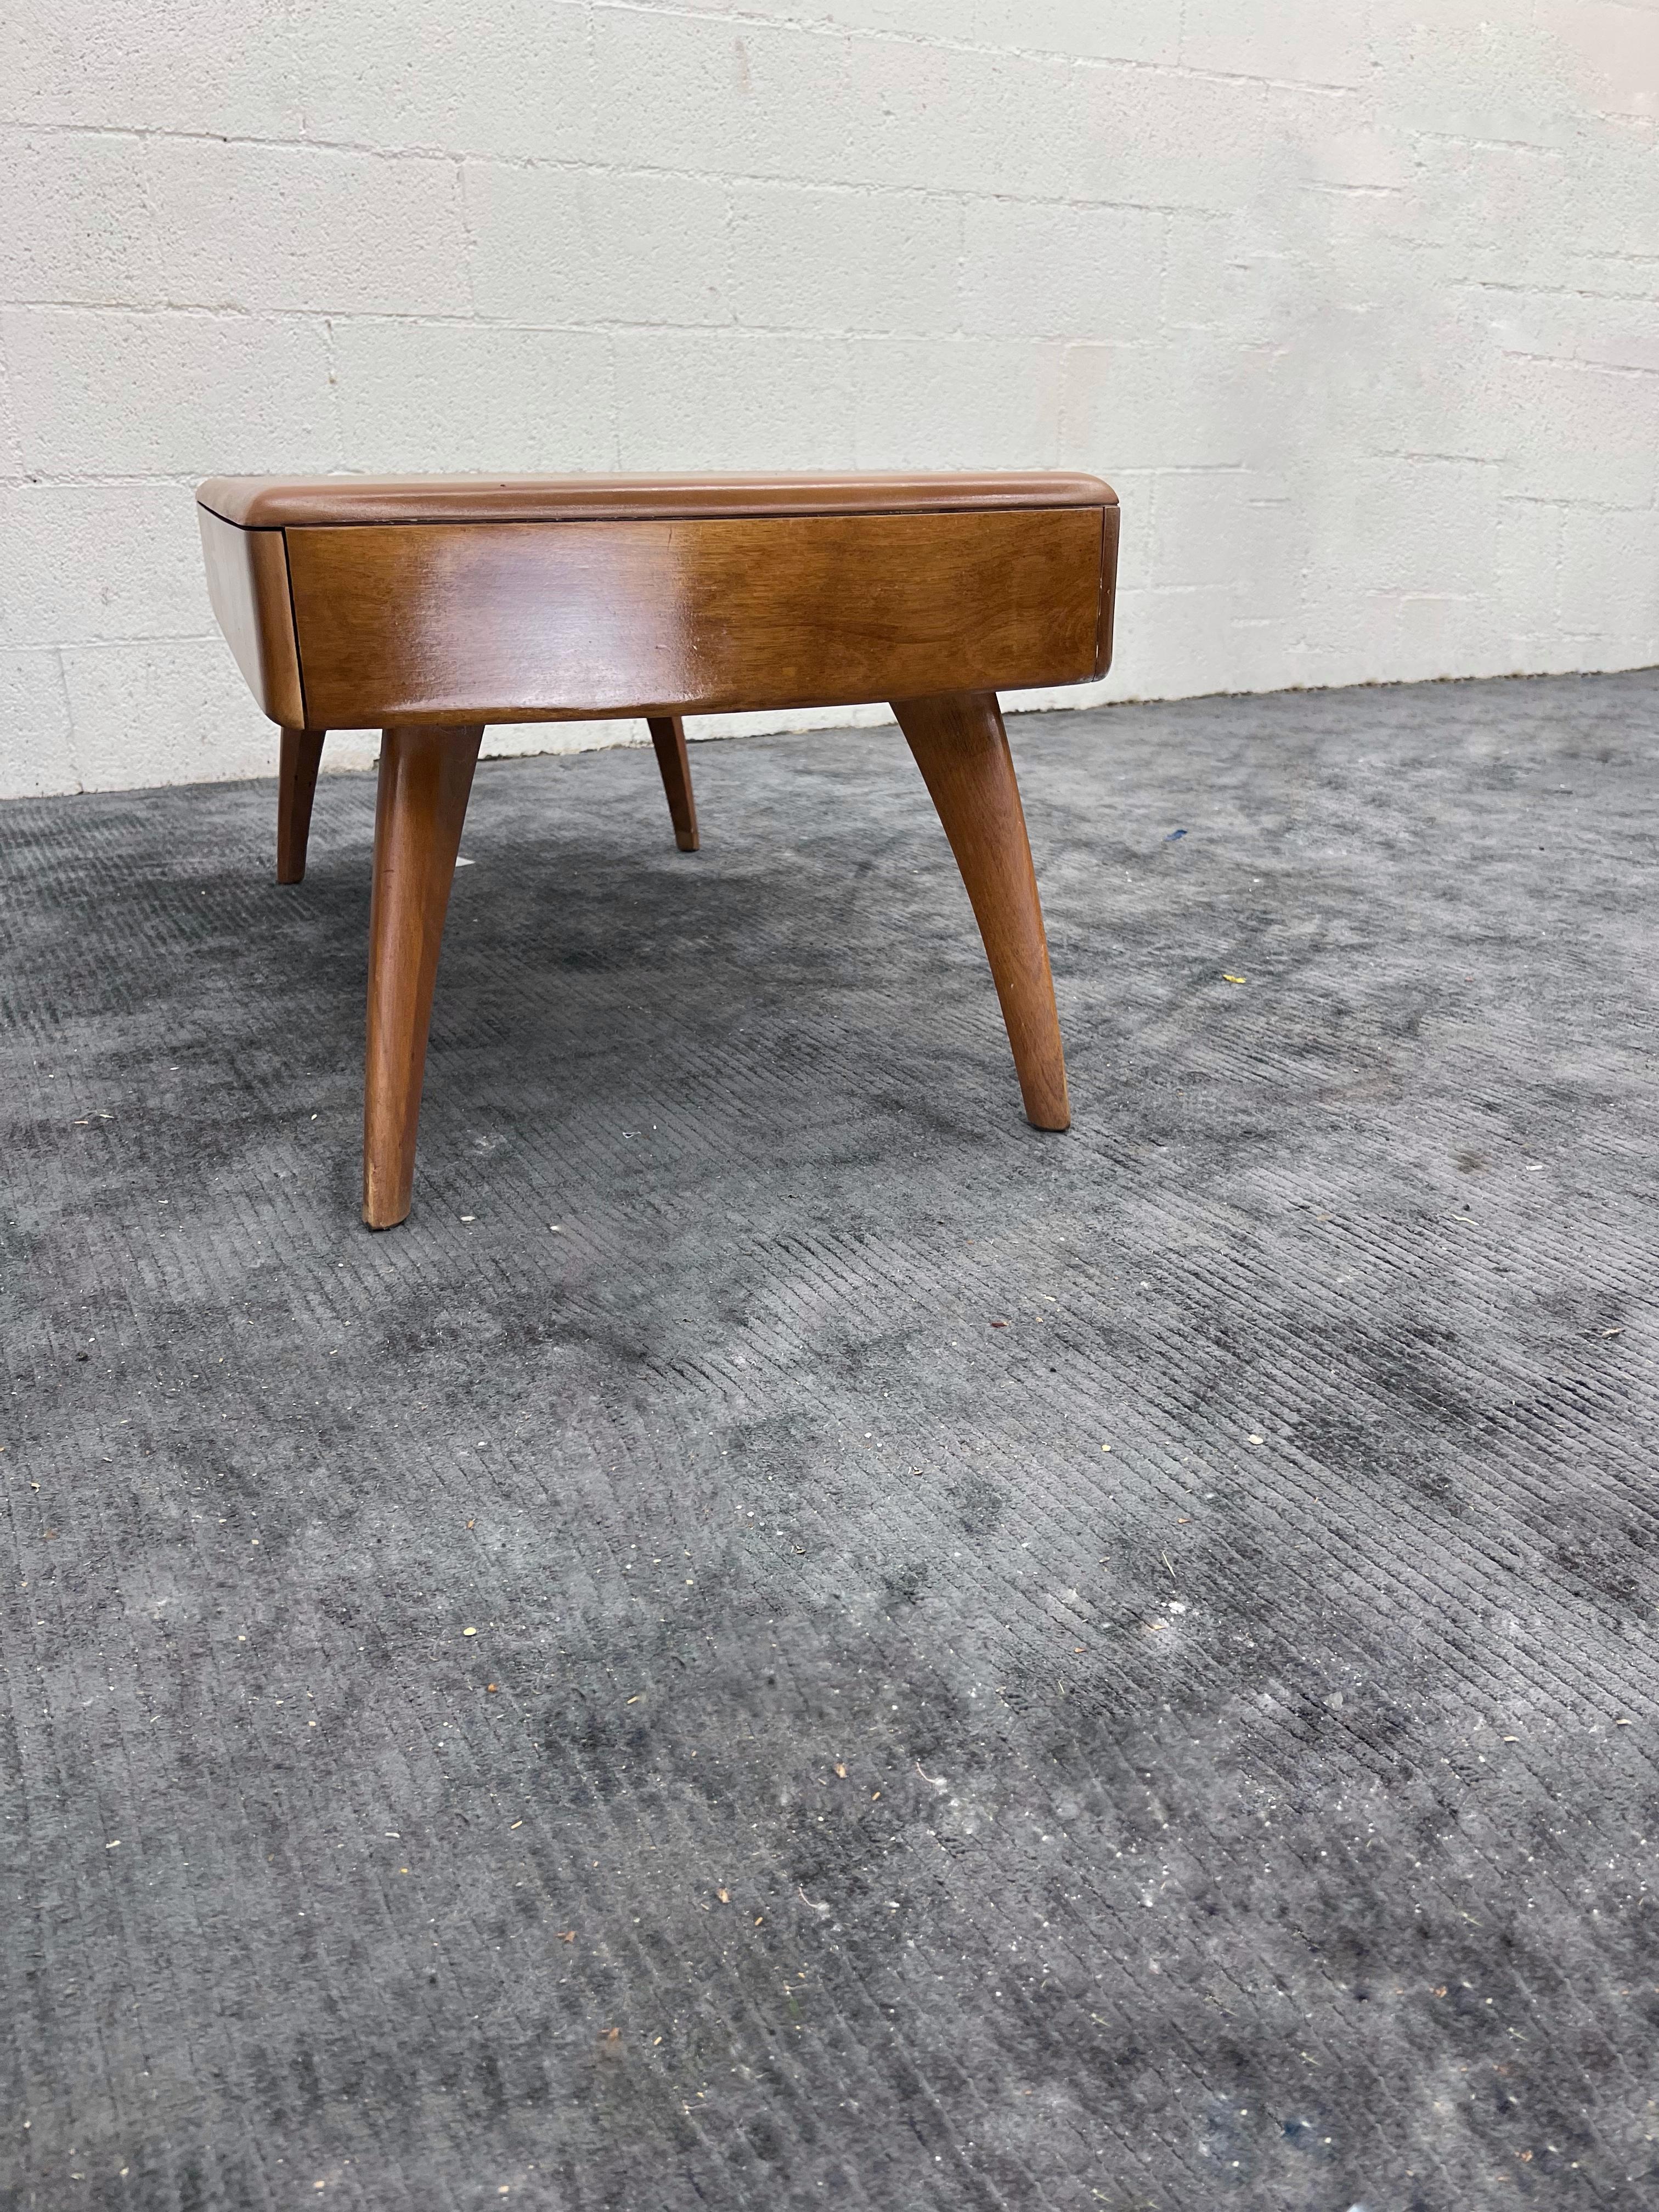  Heywood Wakefield Mid-Century Modern Coffee /Cocktail Table with Drawer 1